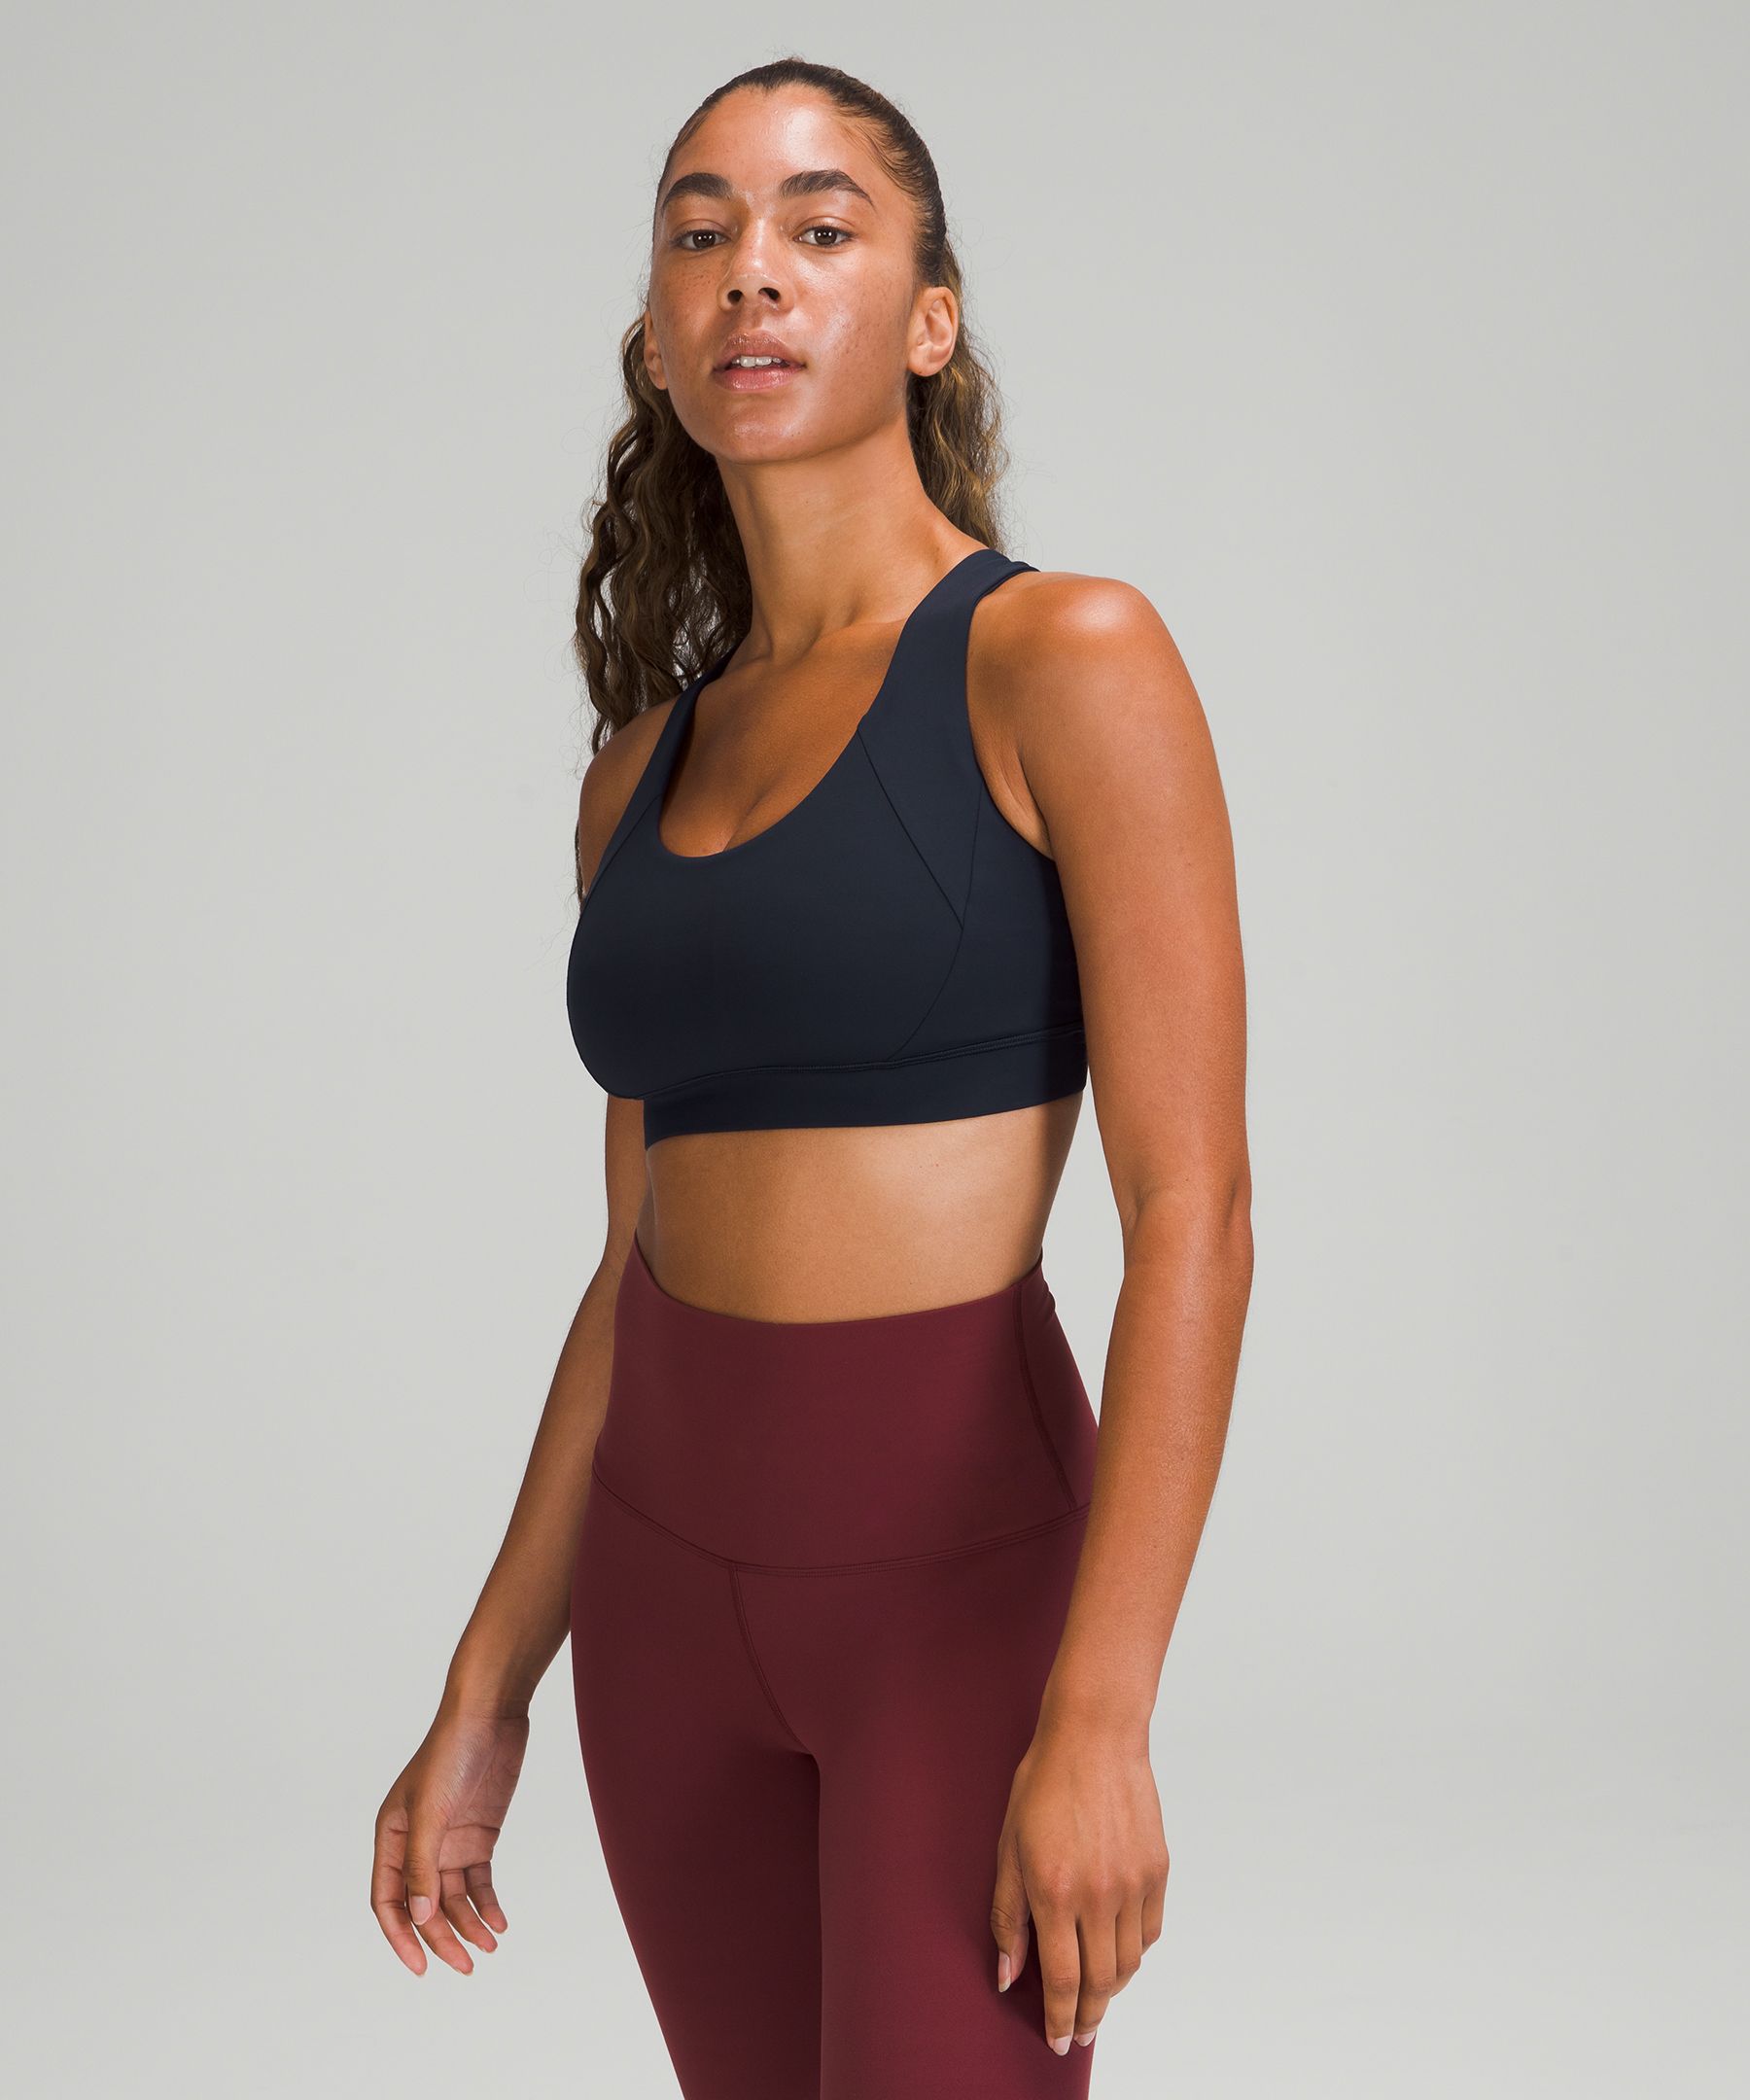 Lululemon Free To Be Elevated Bra Light Support, Dd/ddd(e) Cup In True Navy